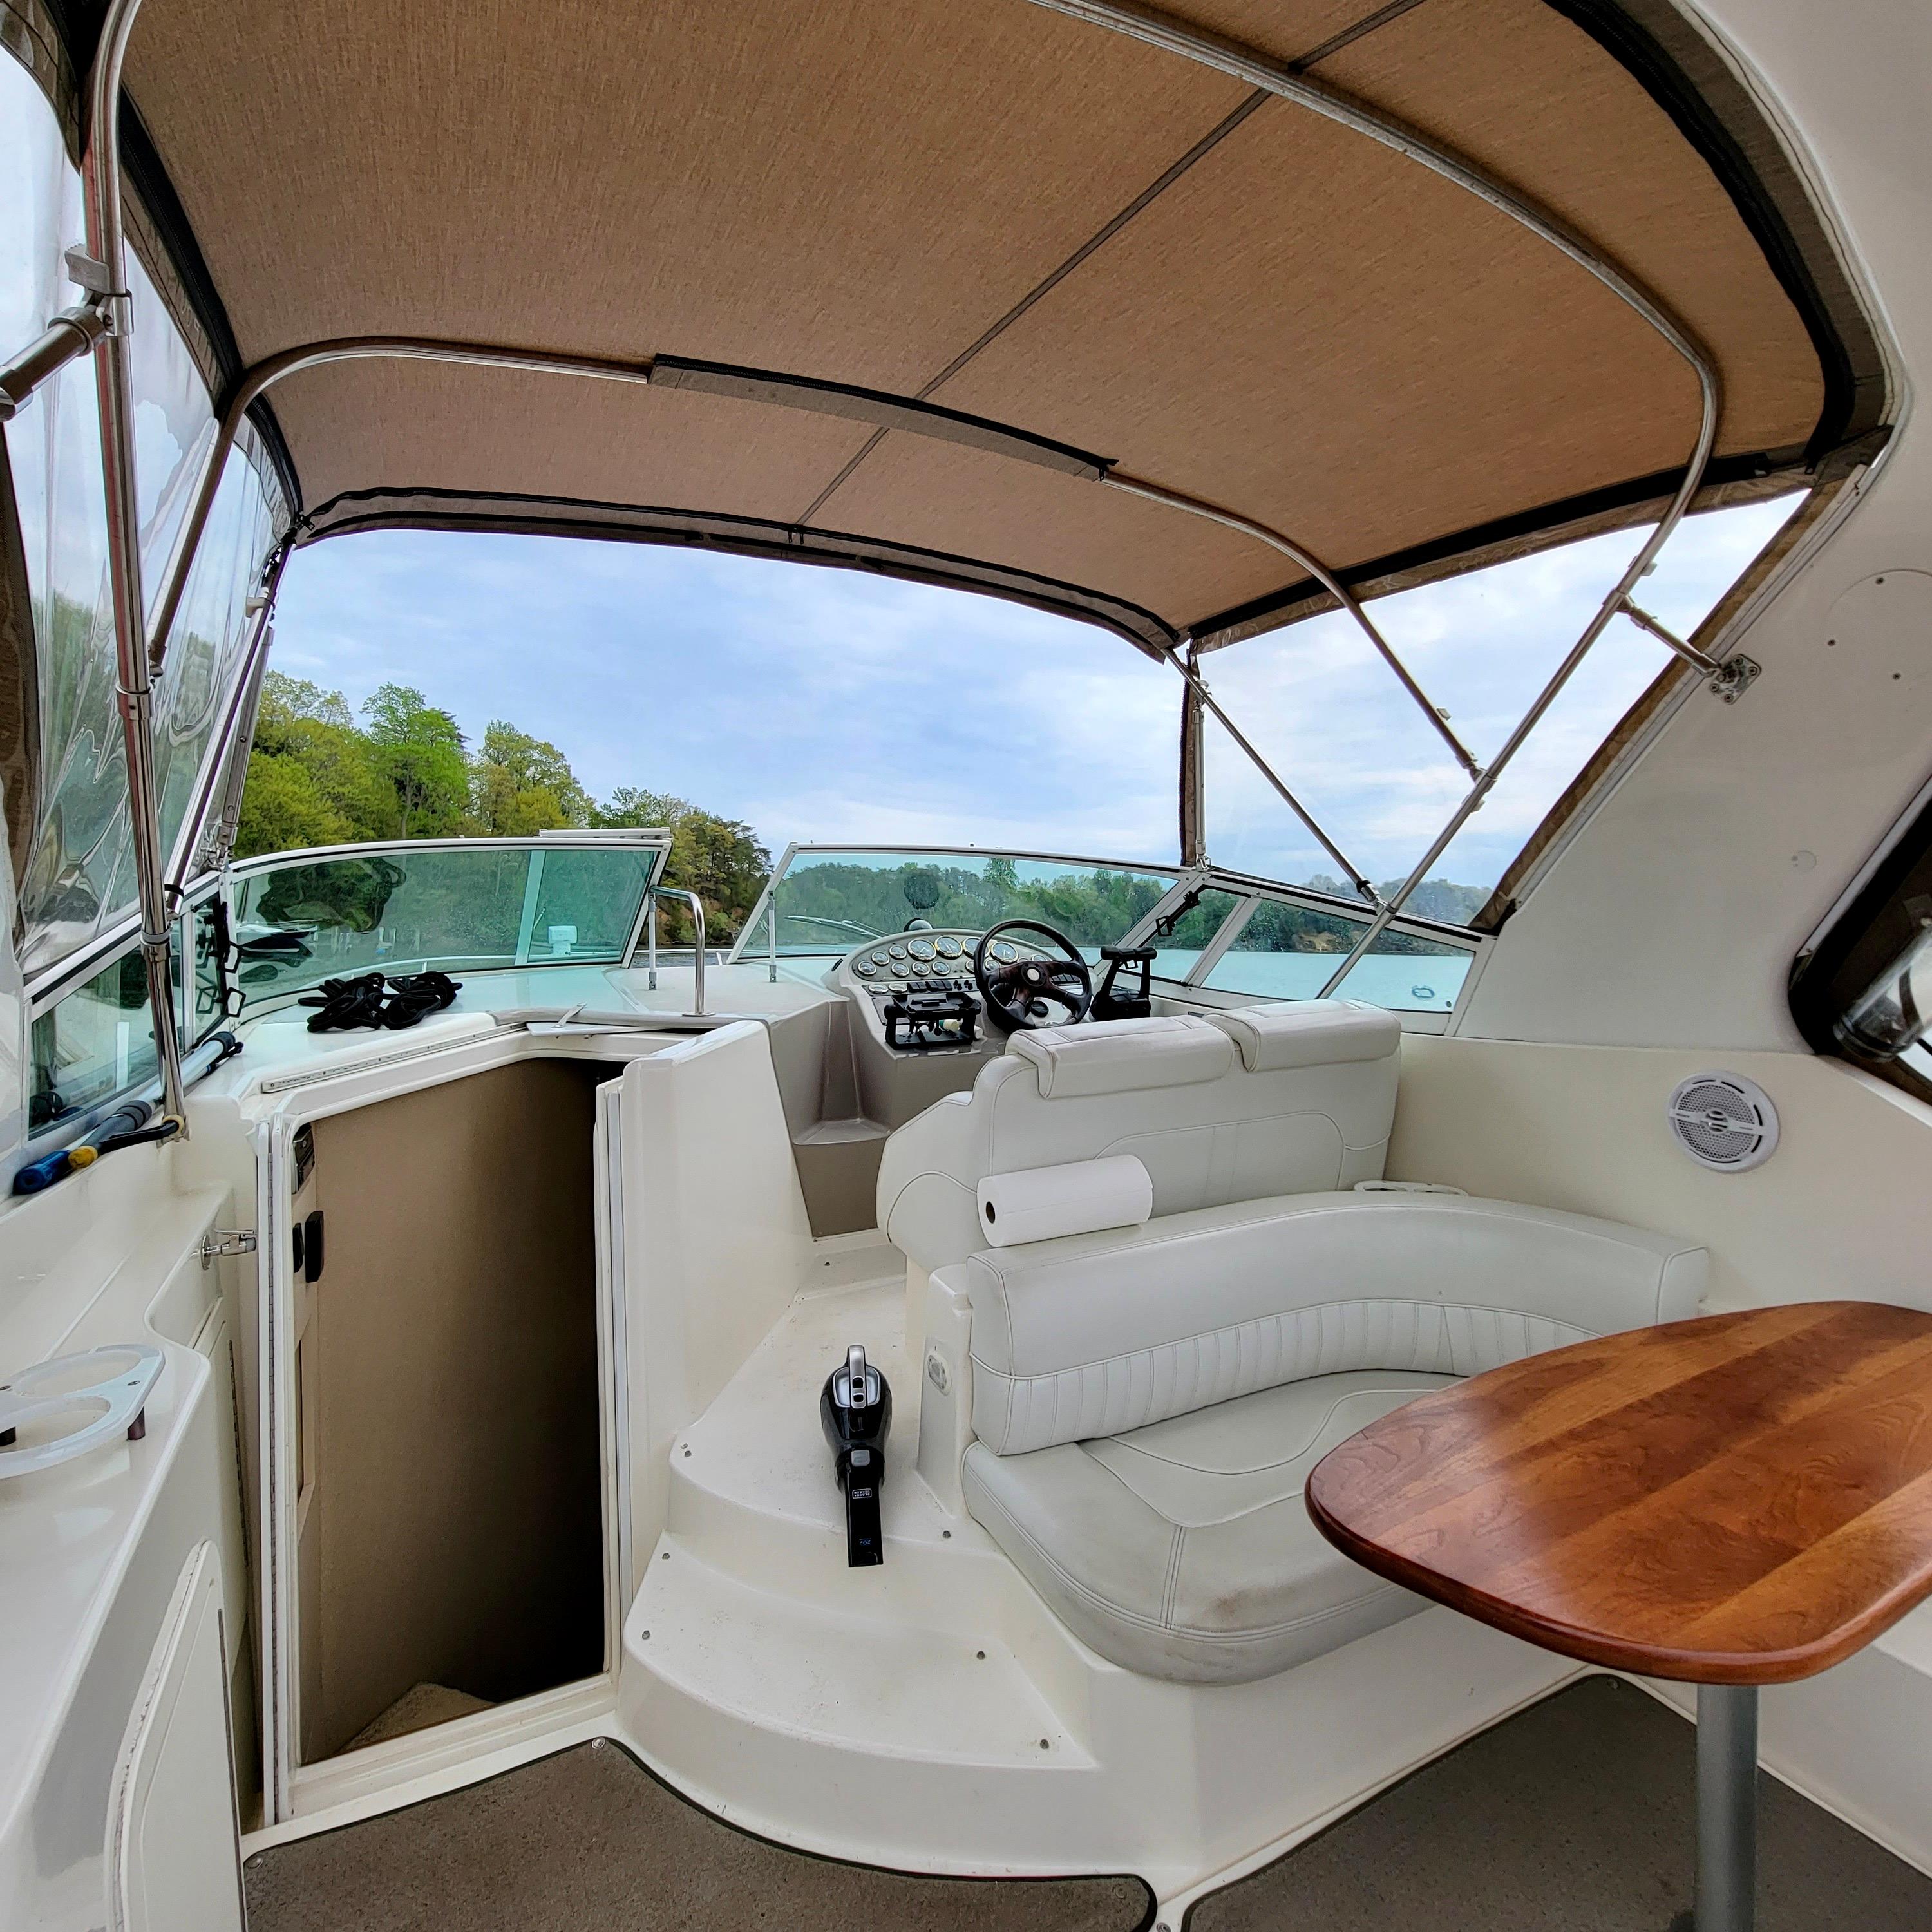 helm and cabin access